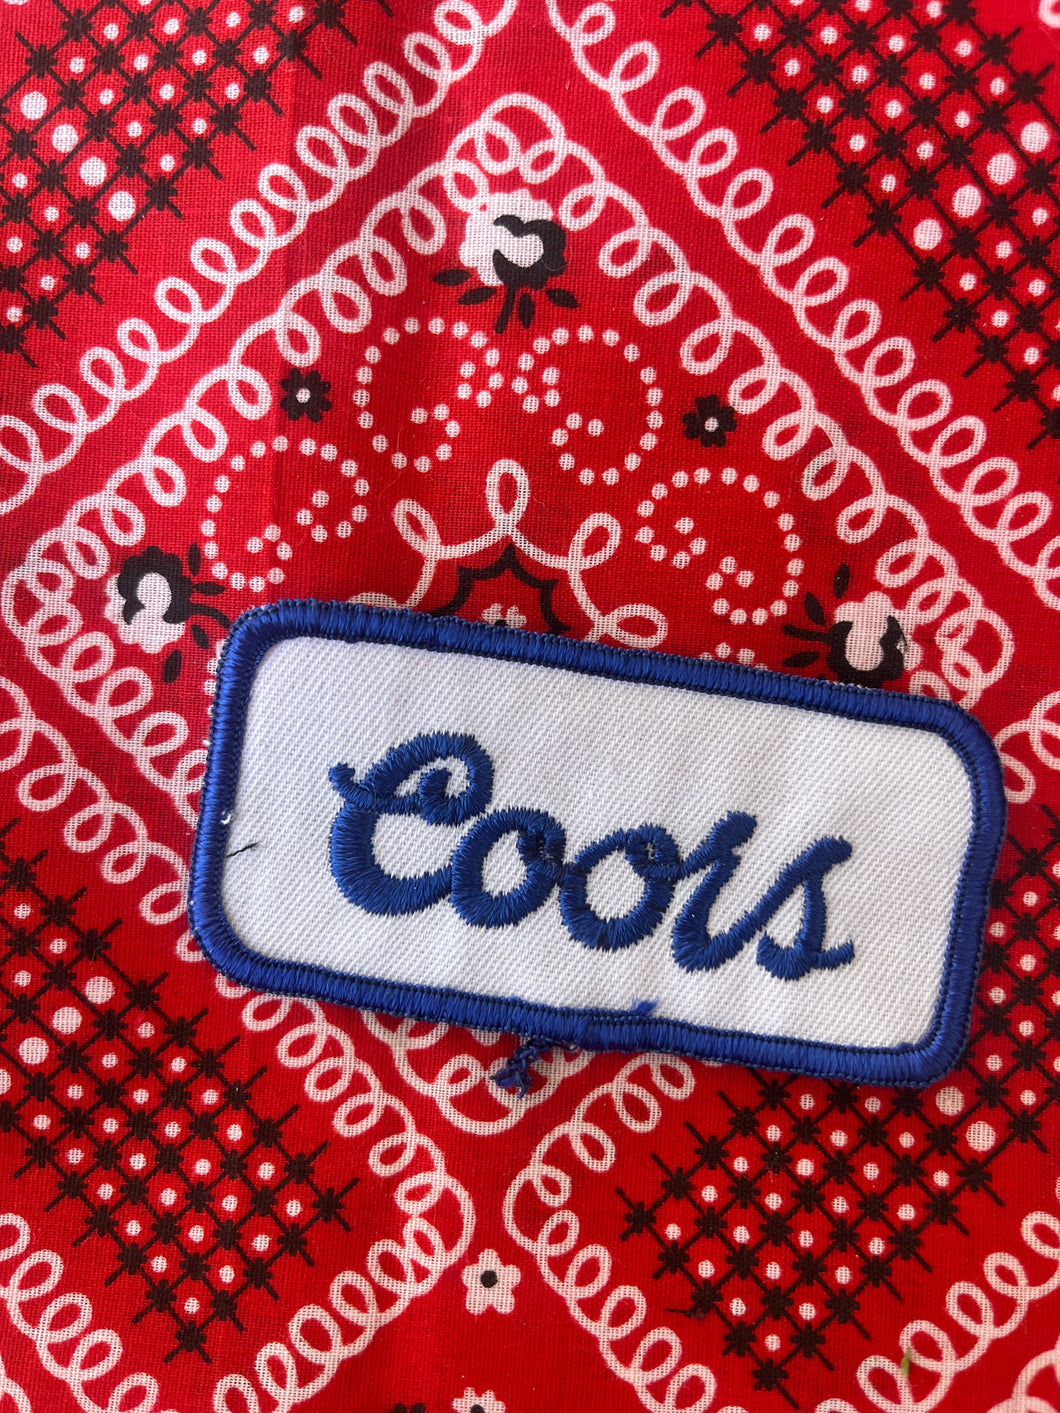 Coors Patch